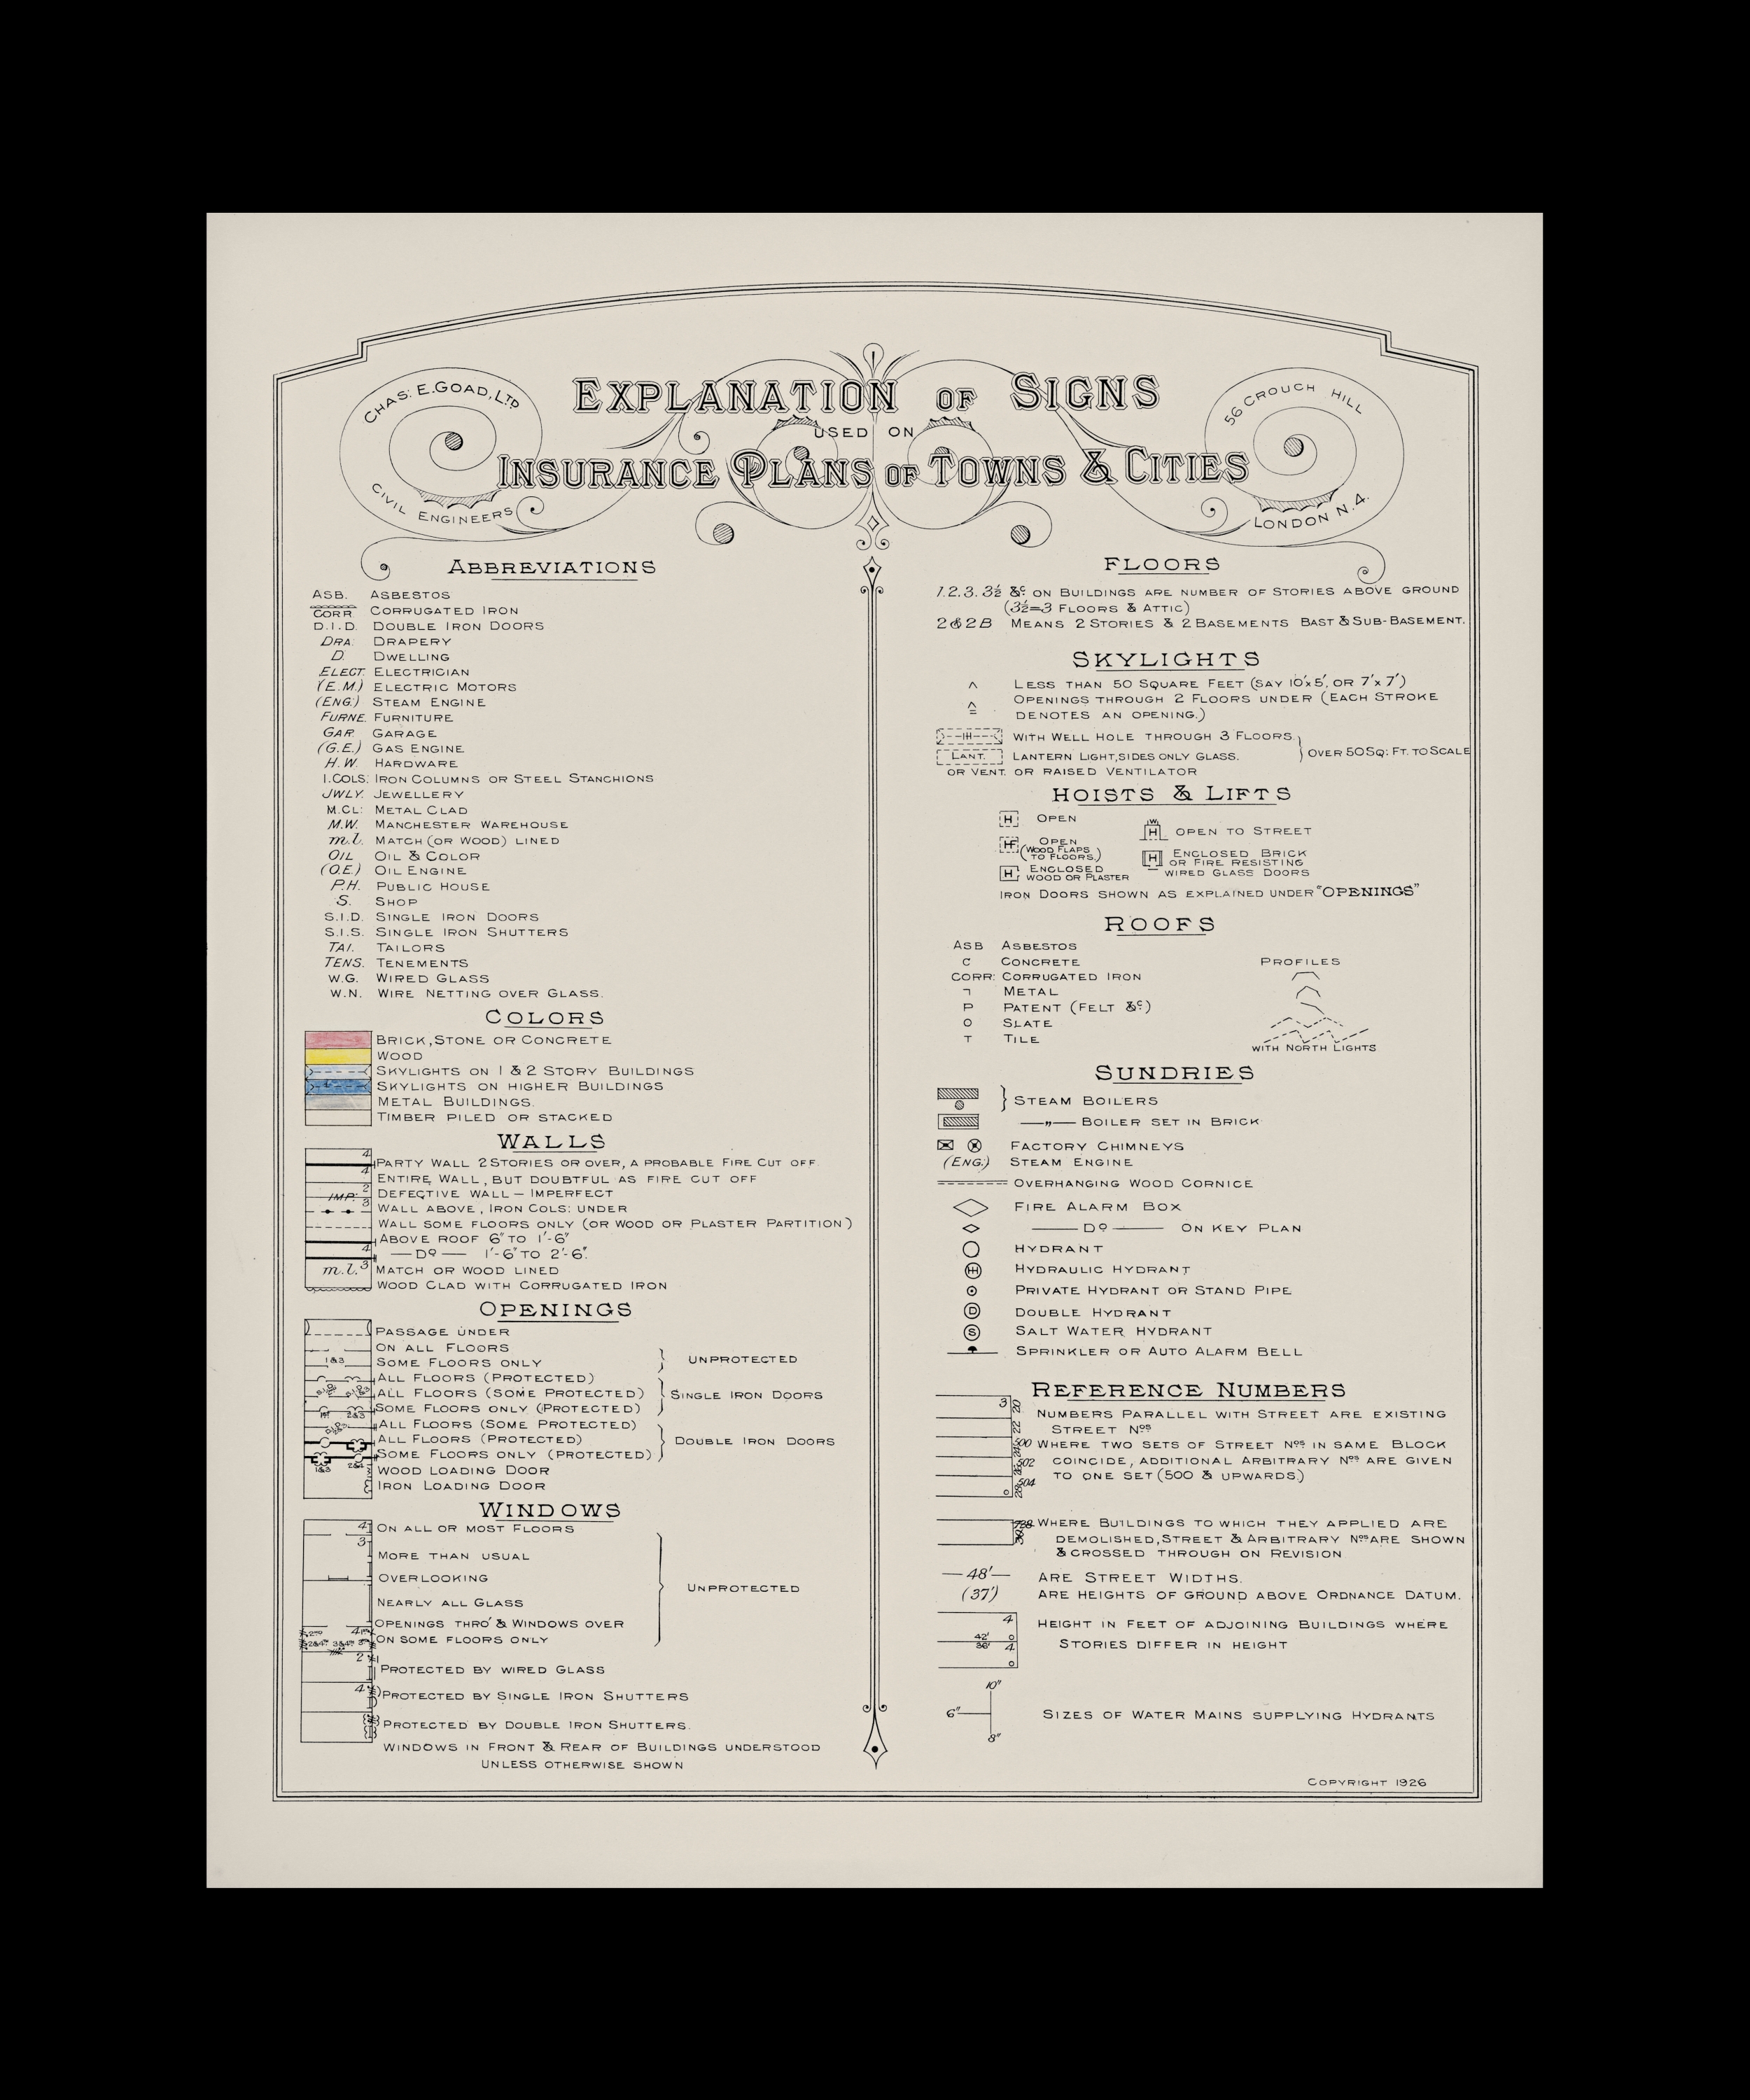 Charles E. Goad - A one-page sheet with a key to abbreviations, colors, reference numbers, and building indications used in insurance plans for cities and towns issued by Charles E. Goad.